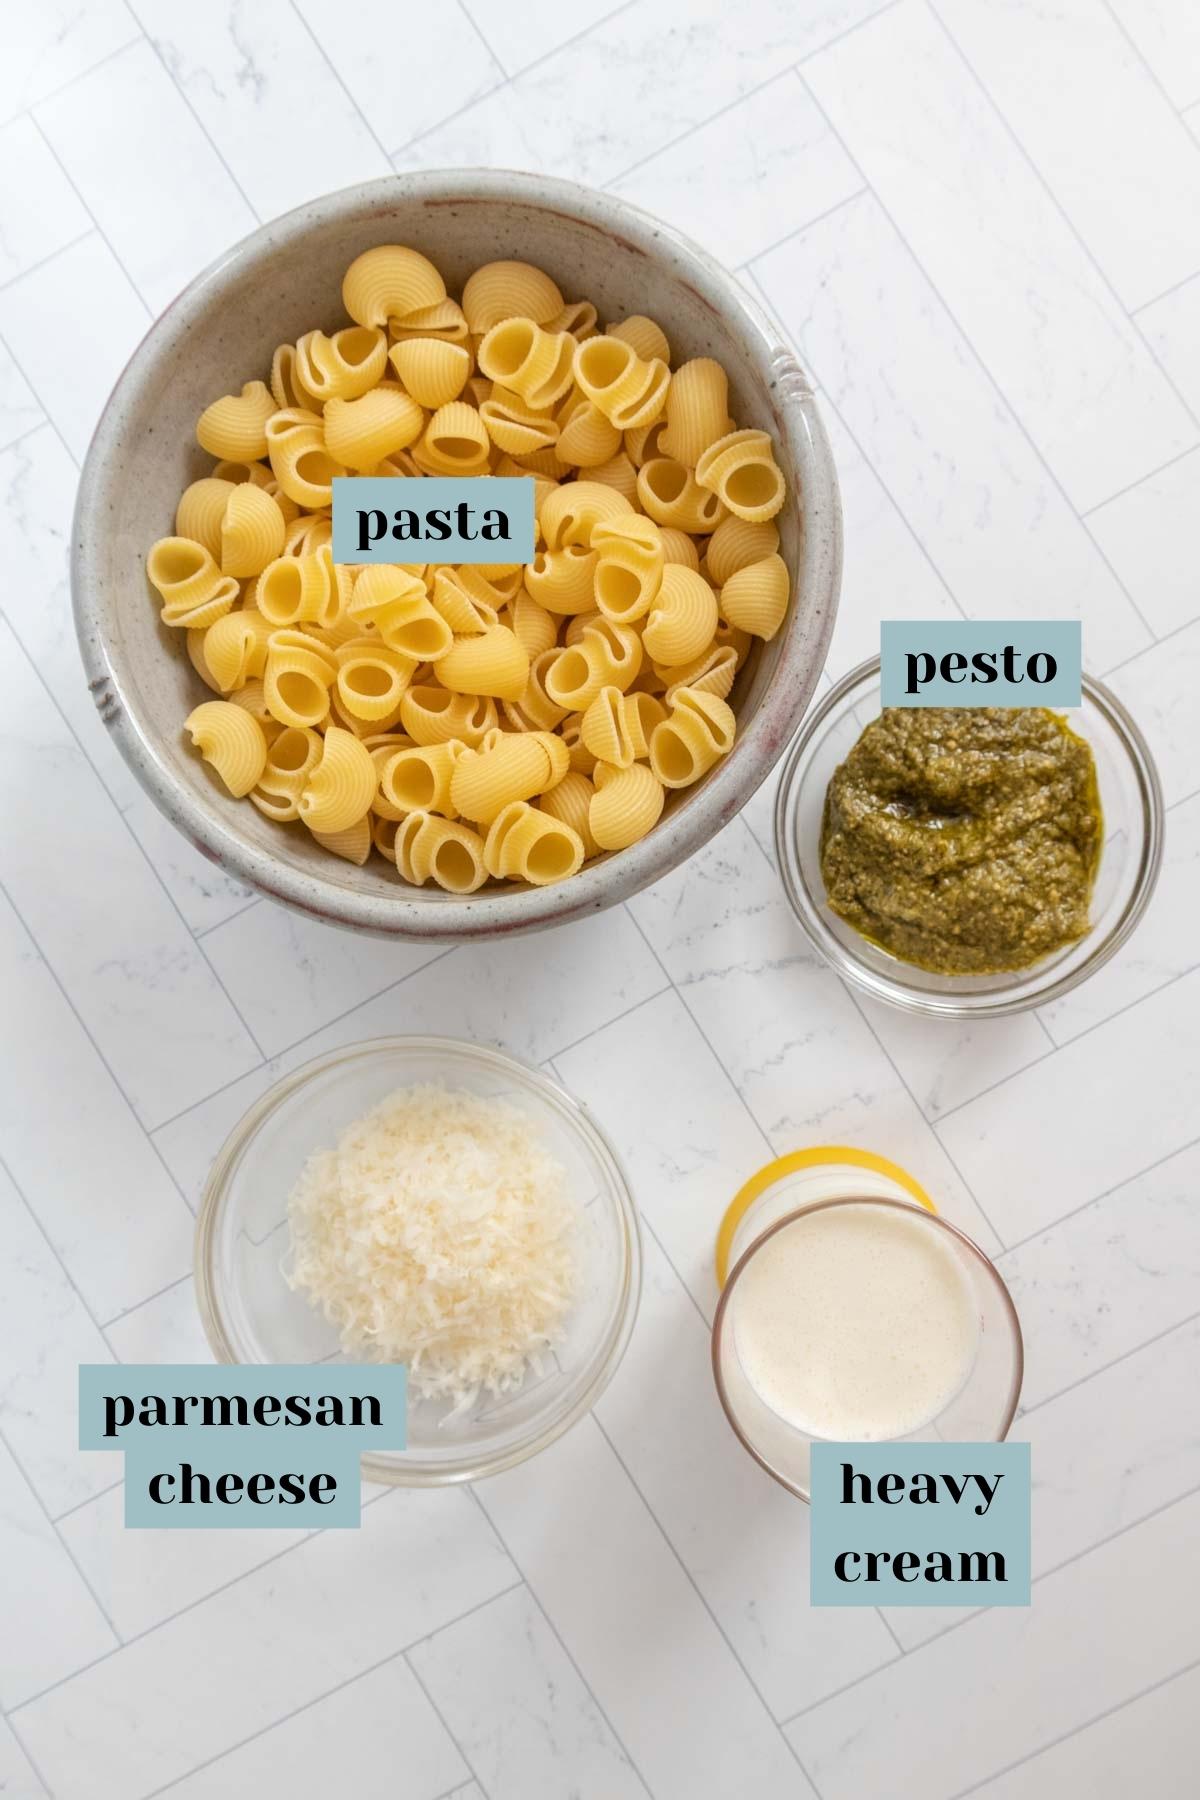 Ingredients for creamy pesto pasta on a tile surface with labels.